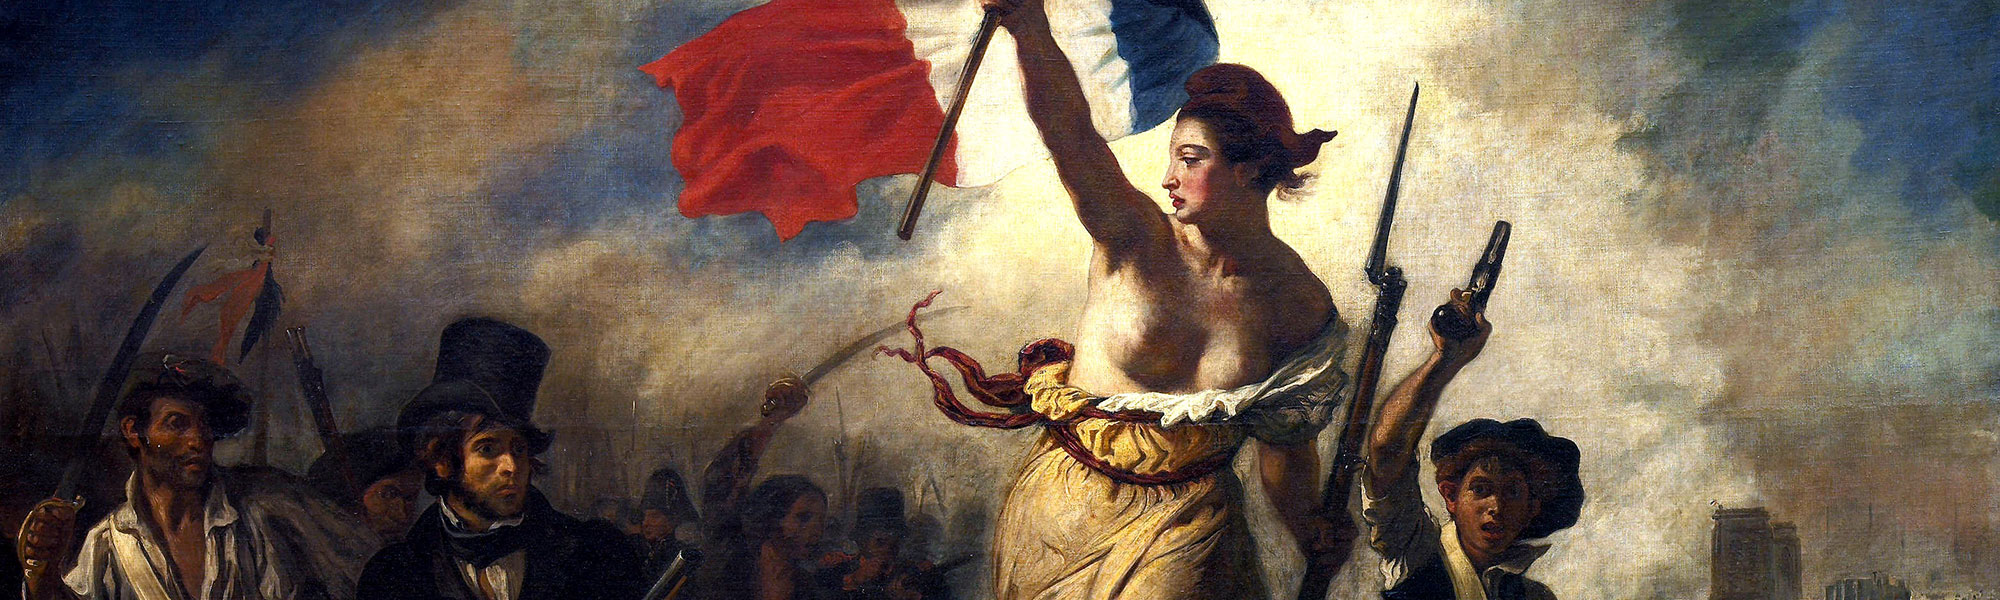 Eugène Delacroix - Romantic history painting. Commemorates the French Revolution of 1830 (July Revolution) on 28 July 1830